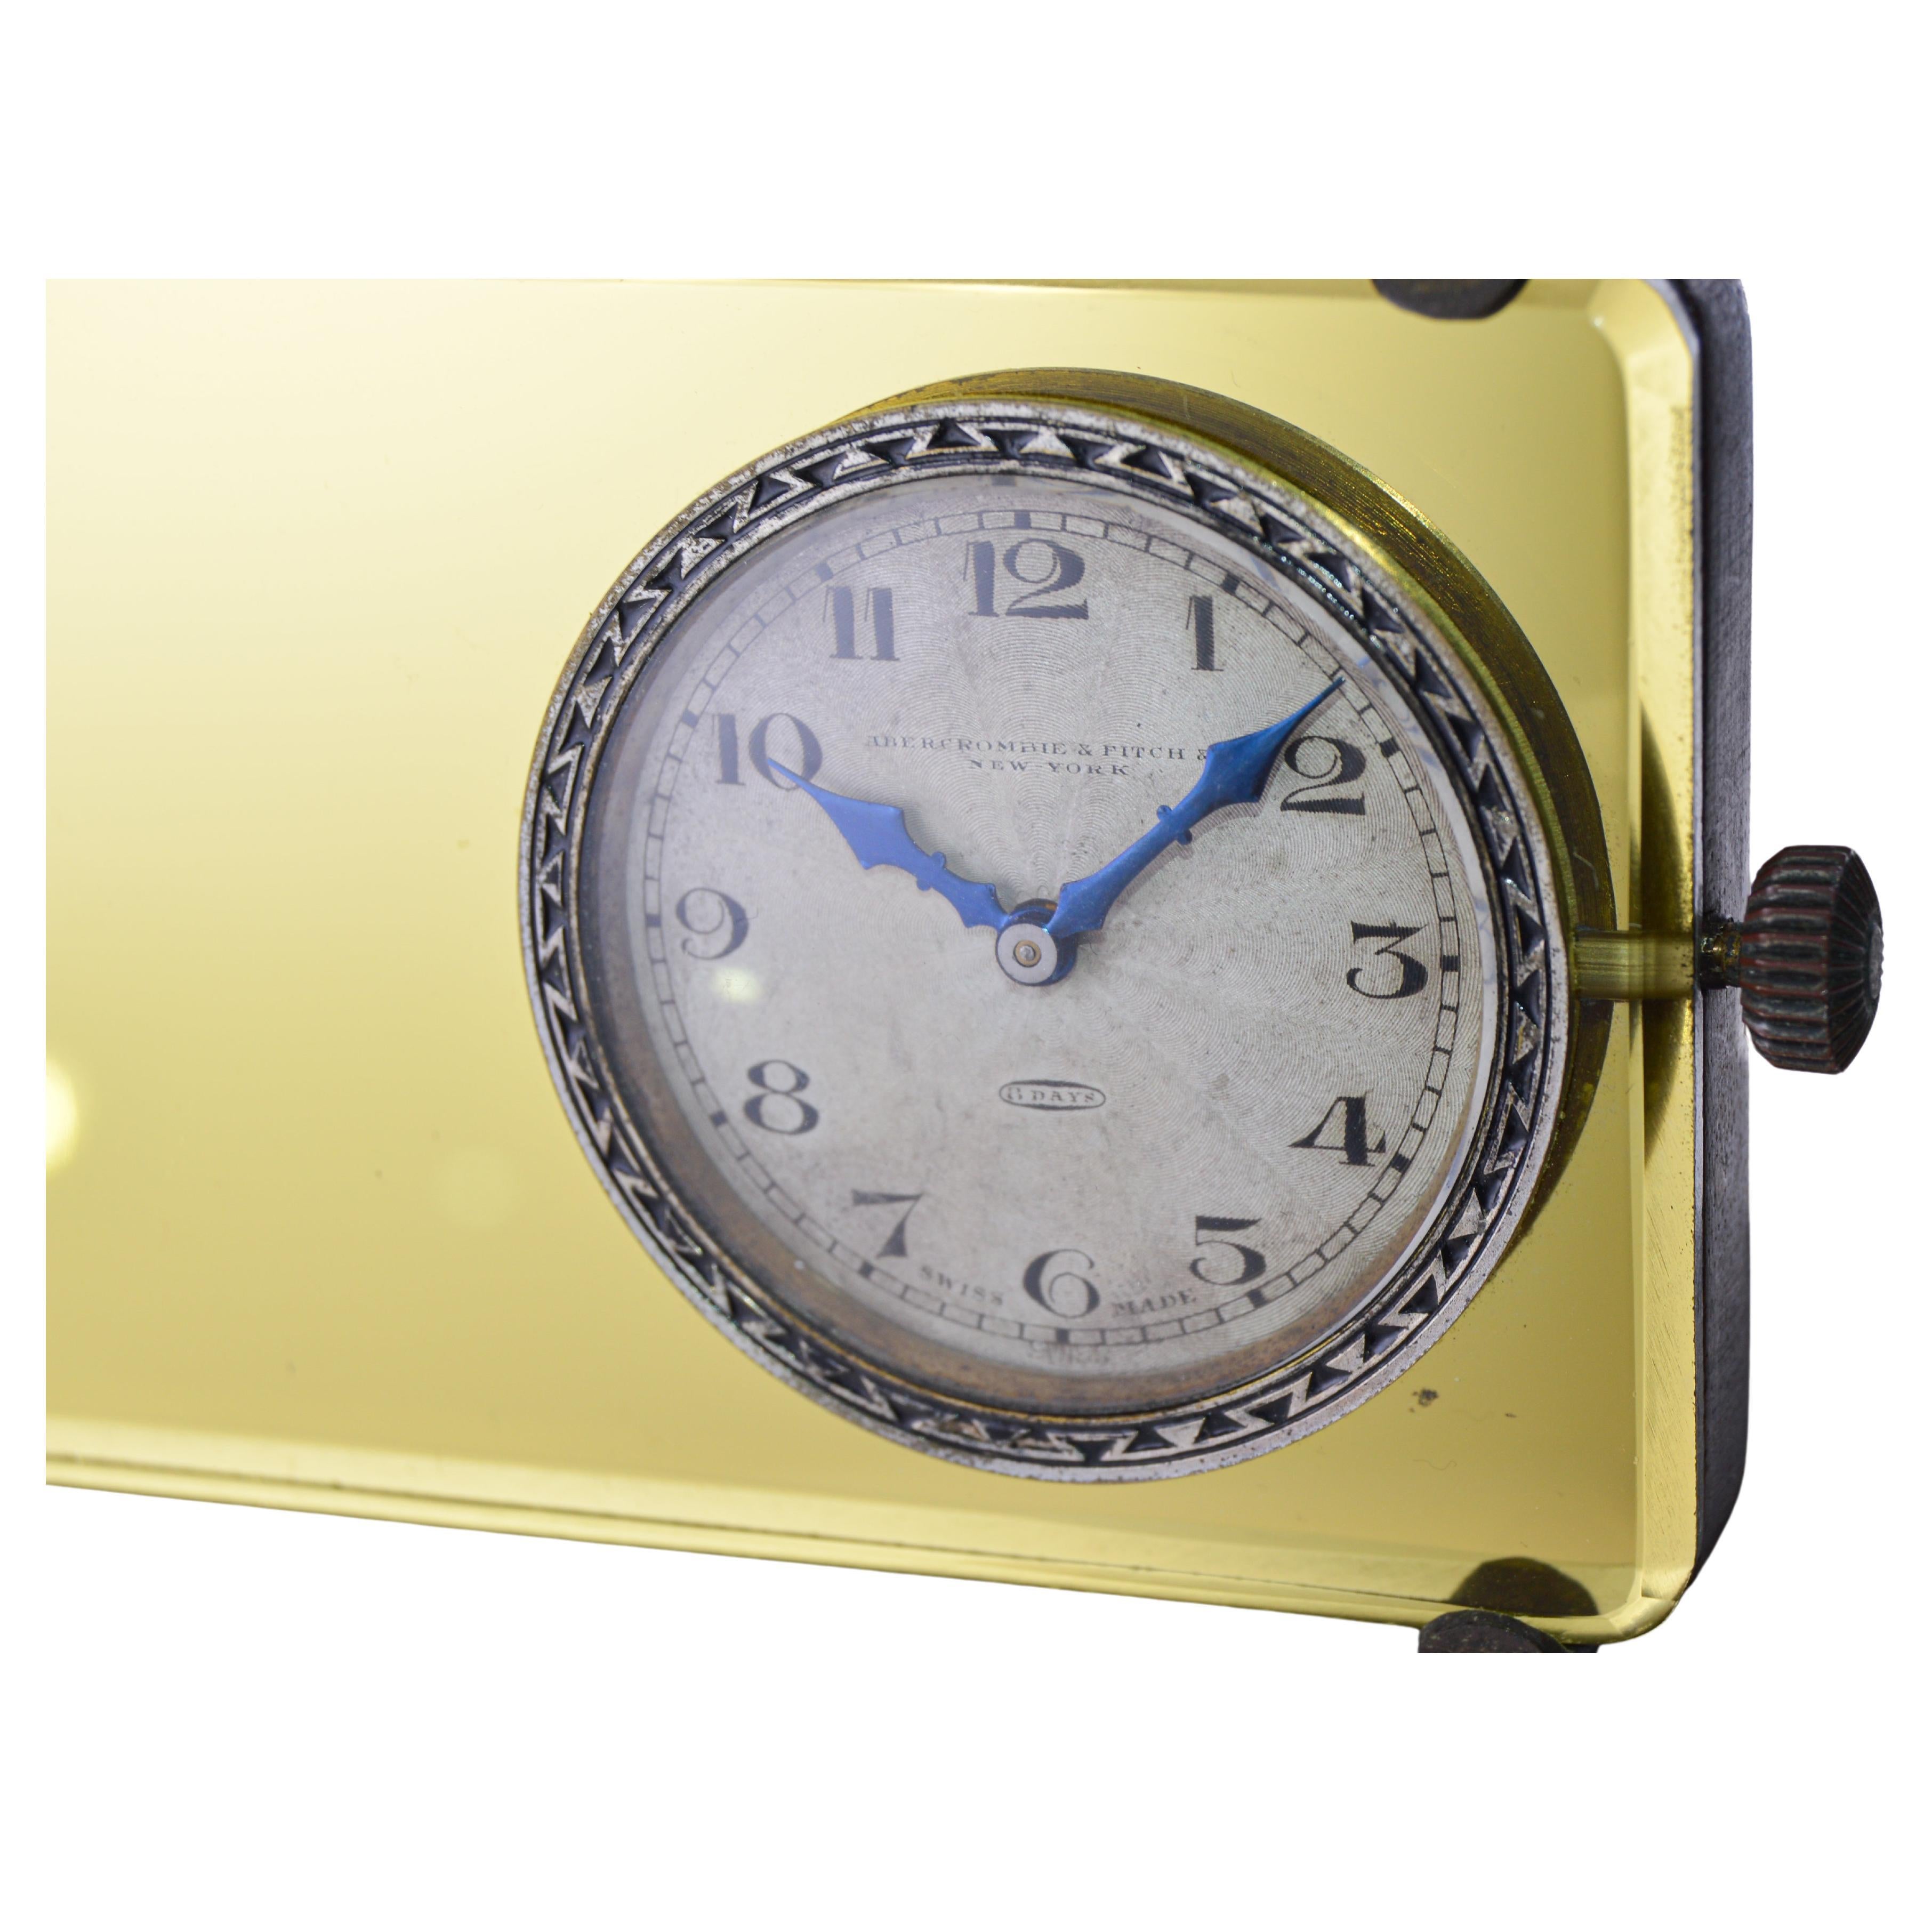 FACTORY / HOUSE: Abercrombie & Fitch
STYLE / REFERENCE: Rear View Mirror Desk Clock 
METAL / MATERIAL: Wood, Metal and Glass 
CIRCA / YEAR: 1930's
DIMENSIONS: 6 Inches Long X 3 Inches Tall X 2 Inches deep
MOVEMENT / CALIBER: Swiss 8 Day Clock 15